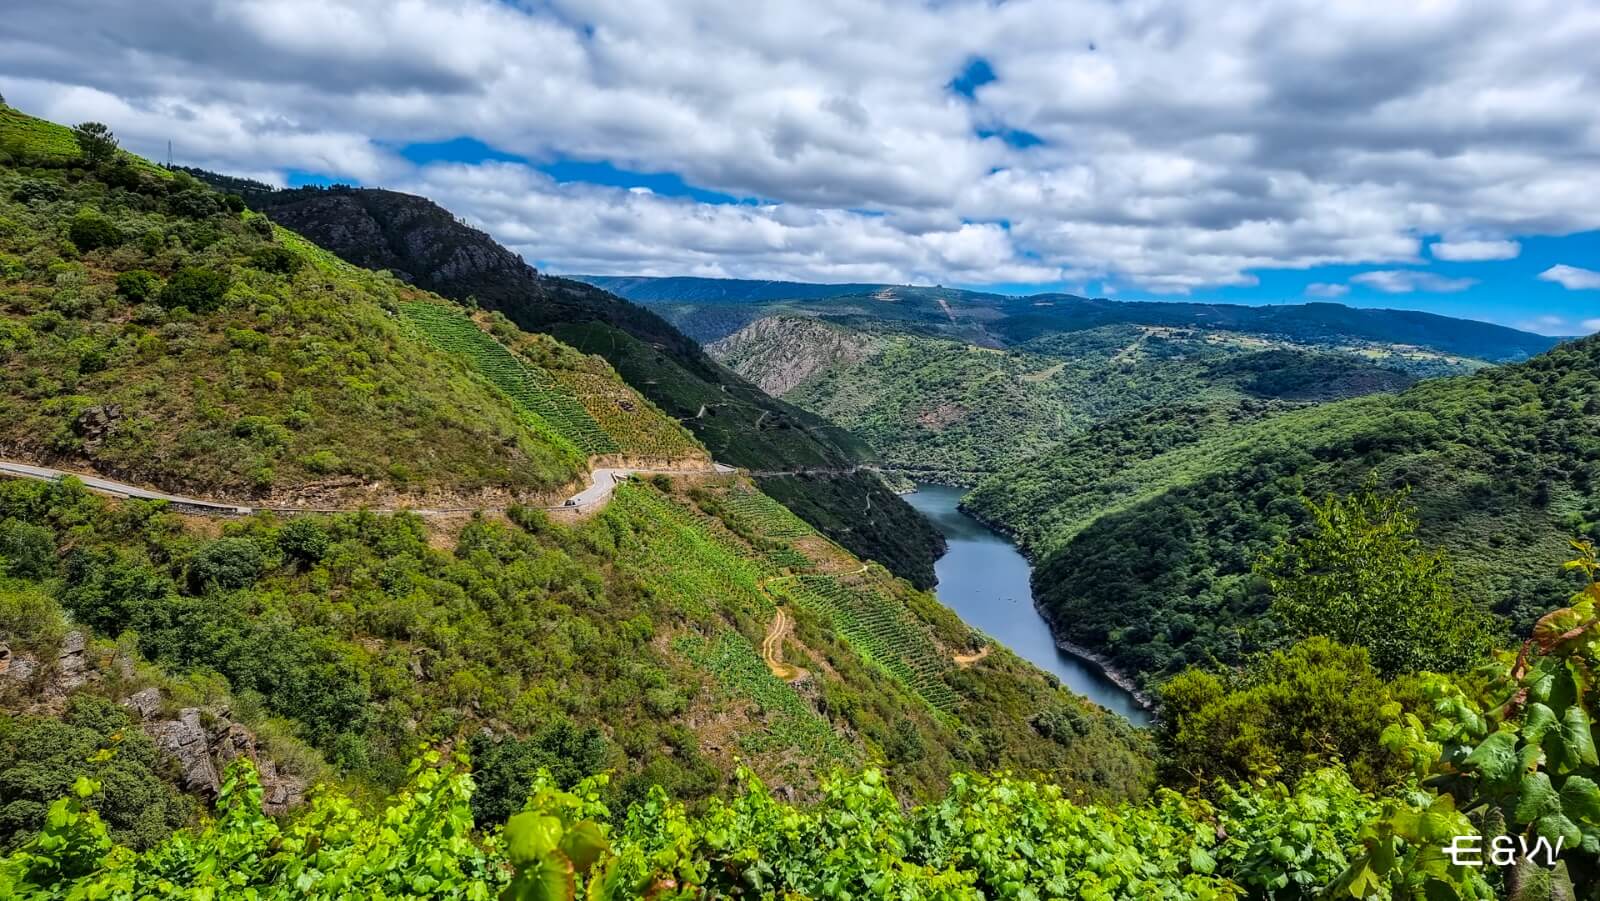 The 8 best places to visit in Galicia - 1. Ribeira Sacra